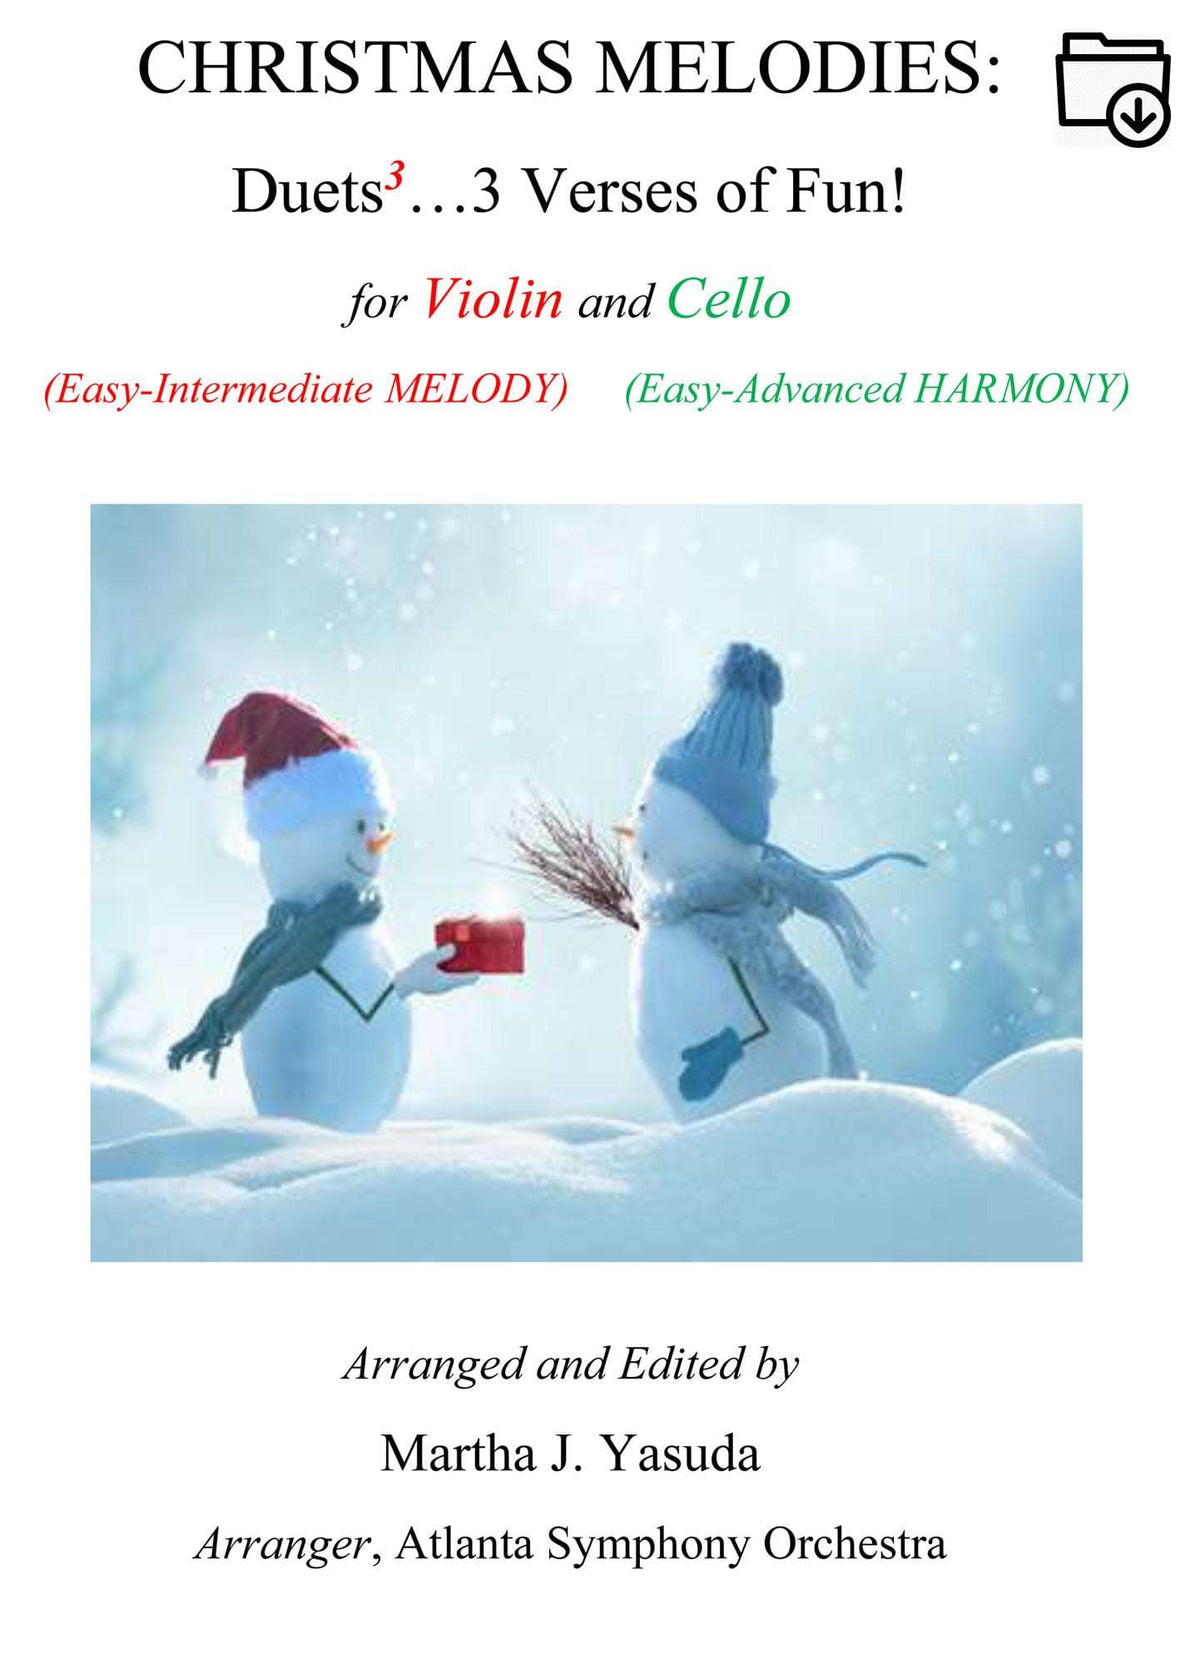 Yasuda, Martha - Christmas Melodies For Violin and Cello: Duets to the 3rd power - Digital Download